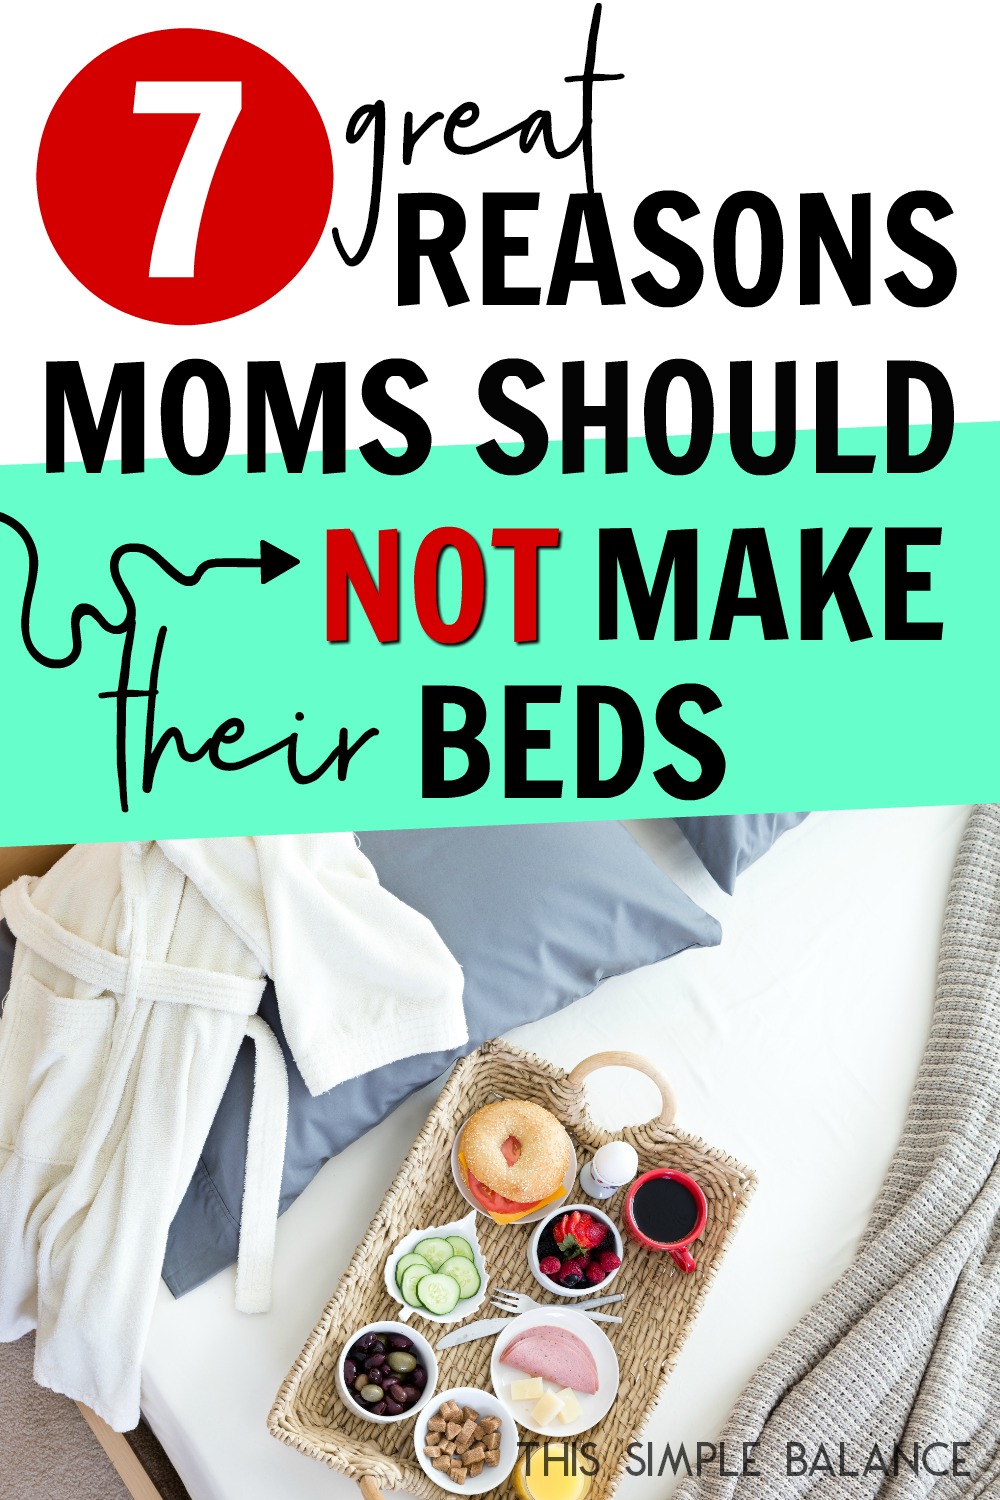 unmade bed with white robe and breakfast tray, with text overlay "7 great reasons moms should not make their beds"